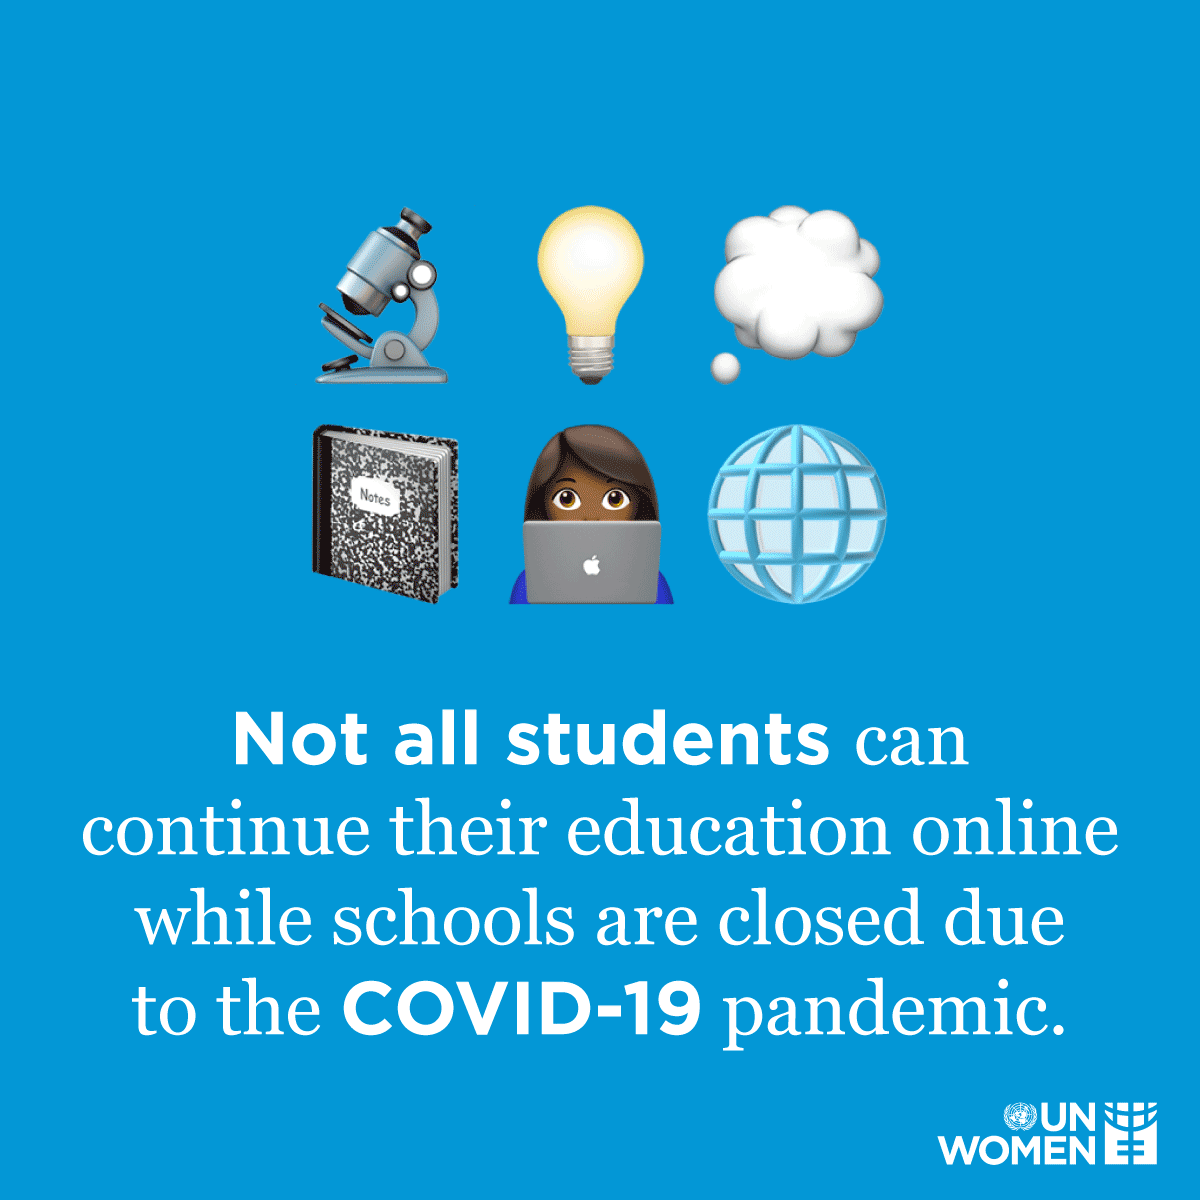 Not all students can continue their education online while schools are closed due to the COVID-19 Pandemic.